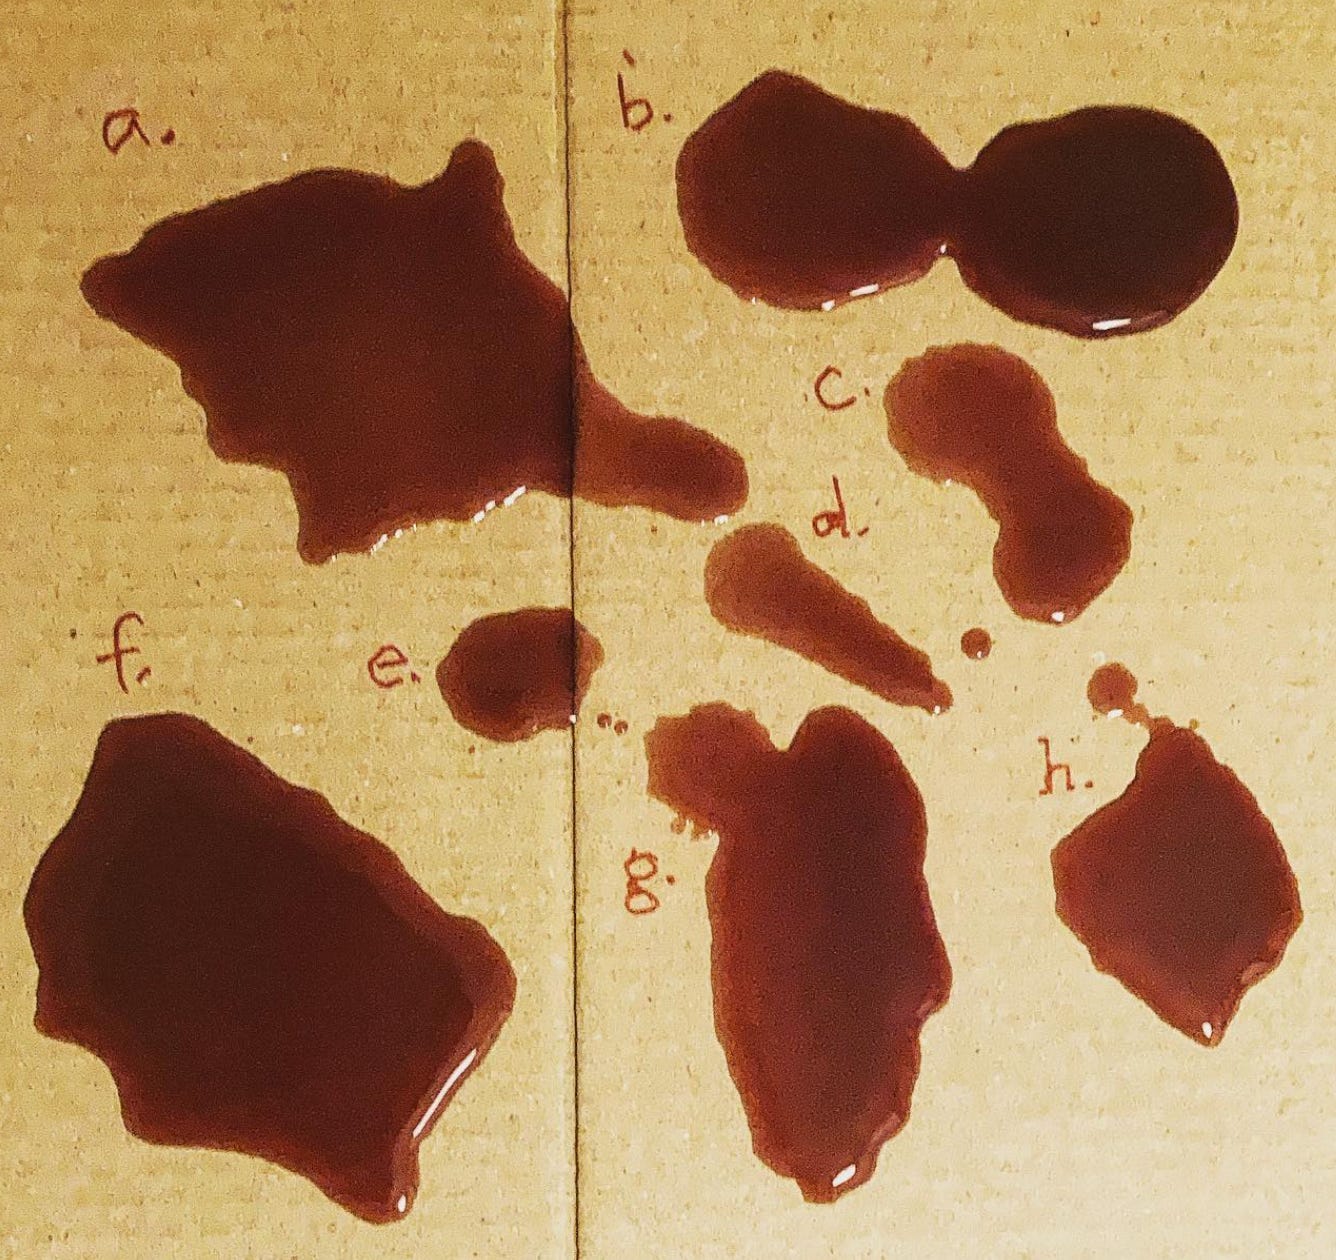 blobs of spilled wine on a piece of cardboard, each with a letter next to the blob, as if a diagram.